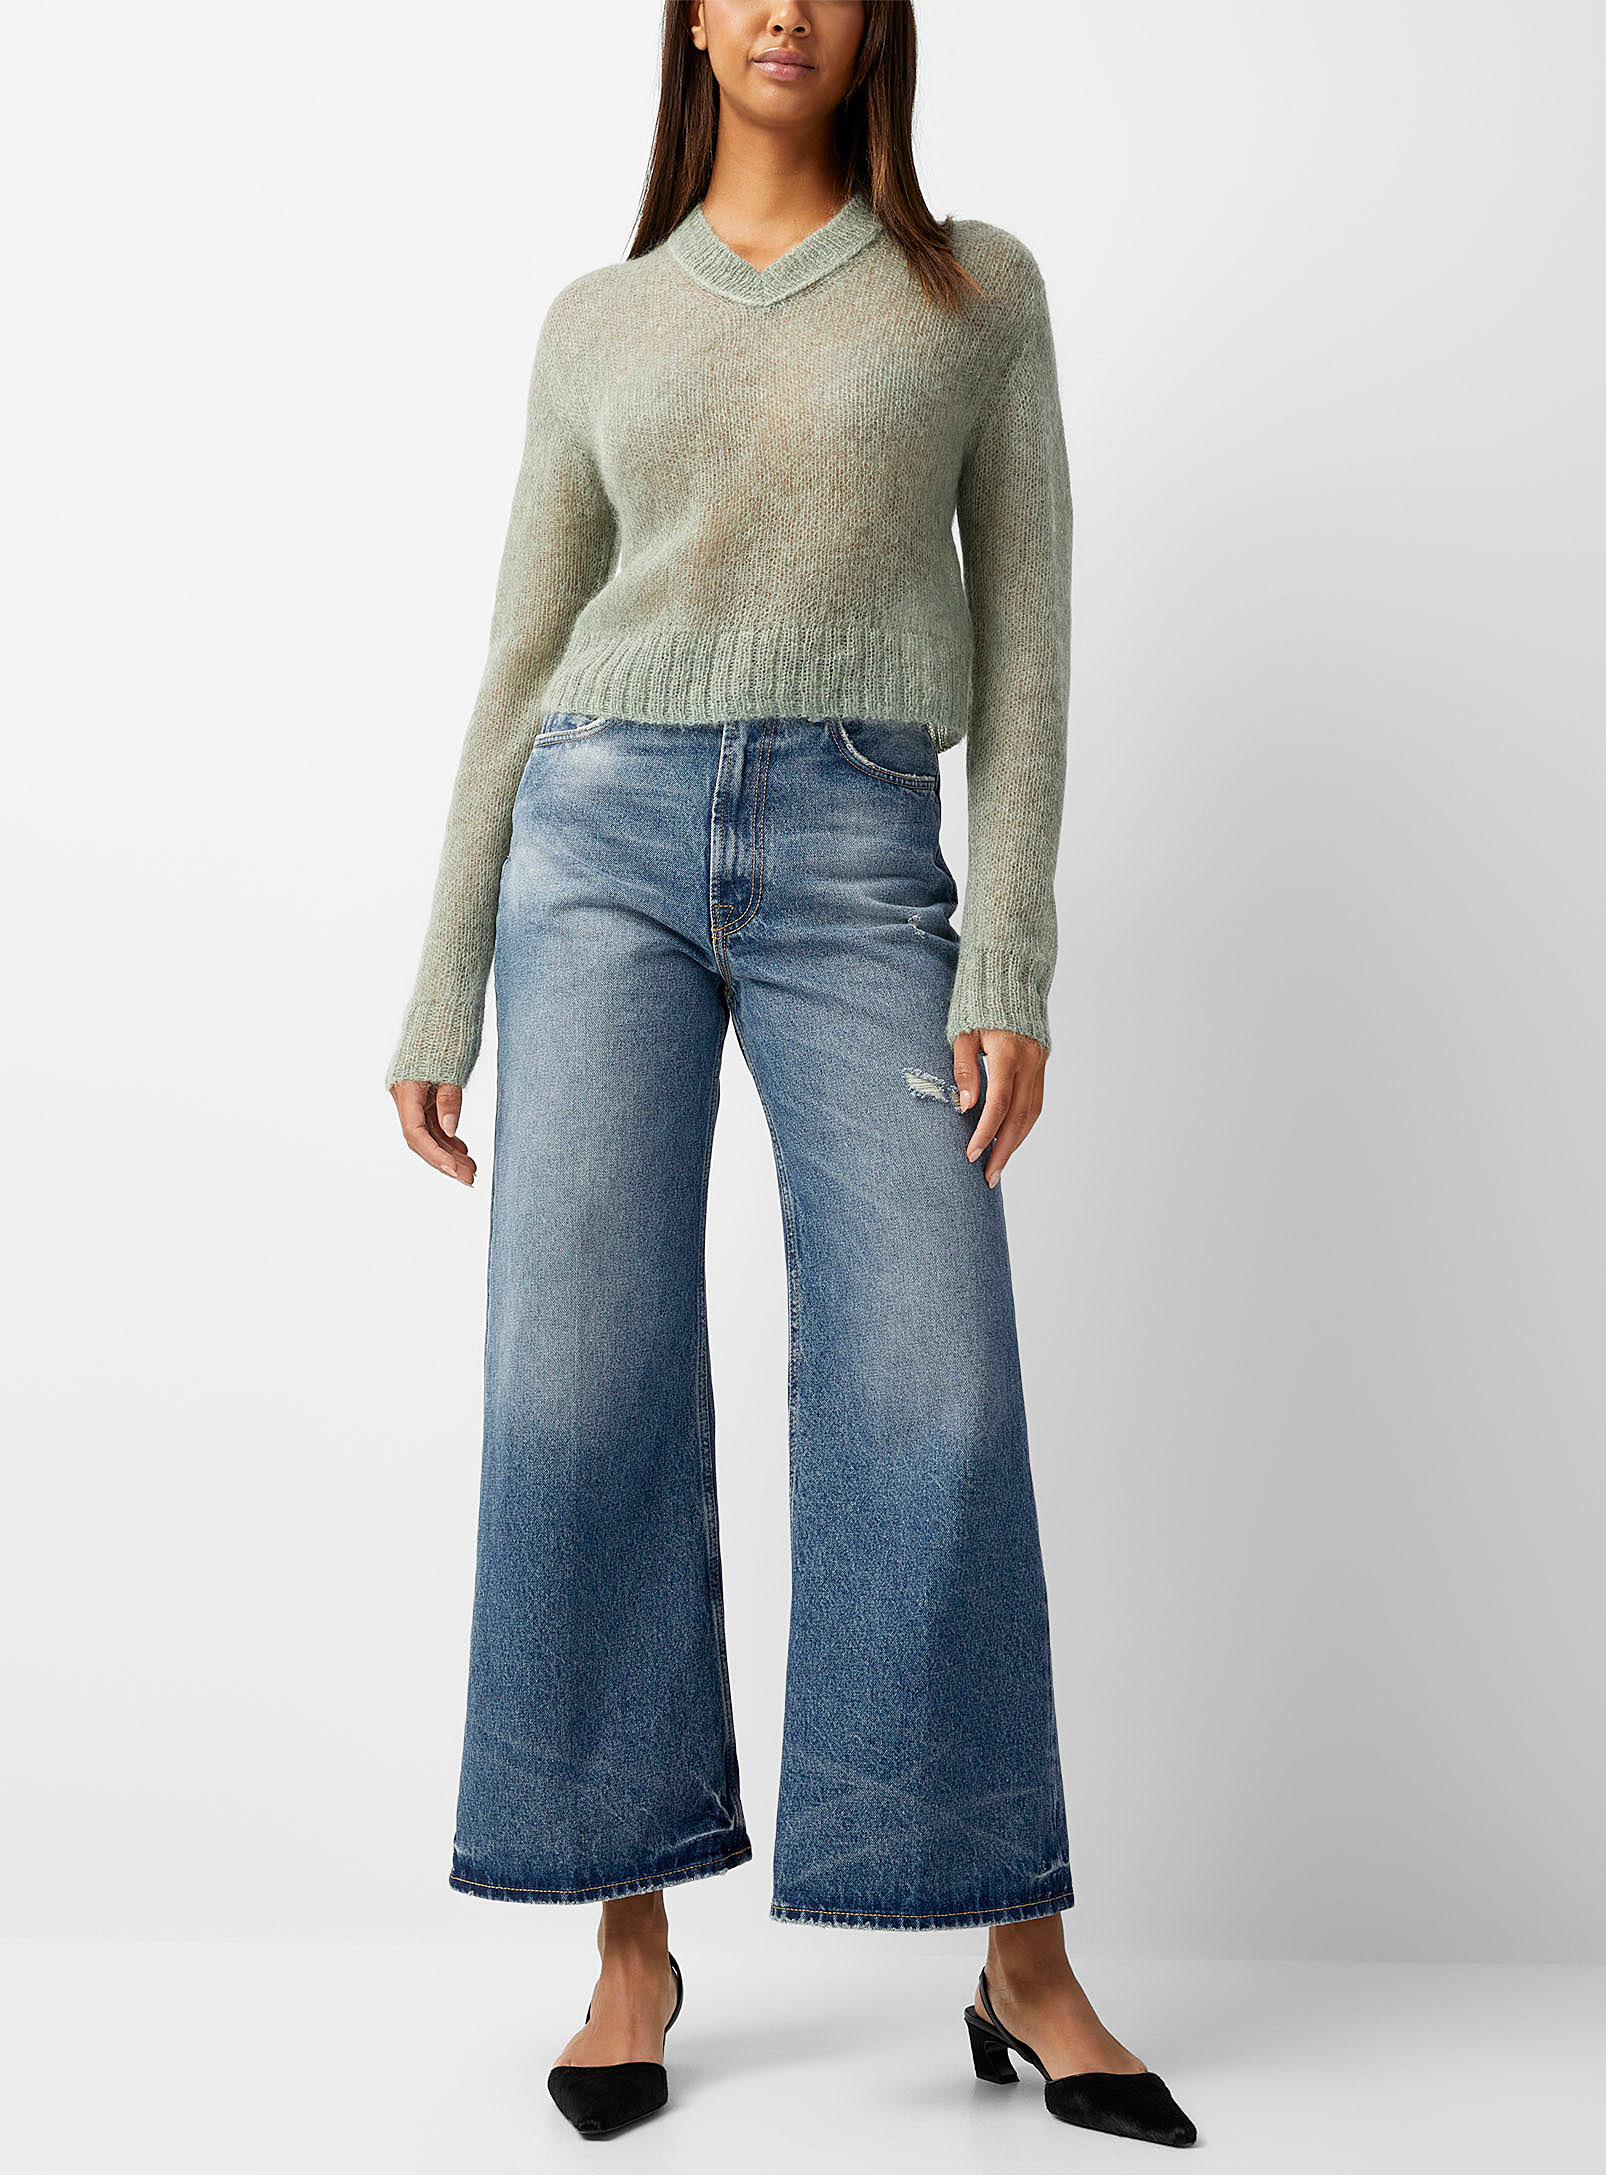 Acne Studios - Women's Distressed accents loose blue jean